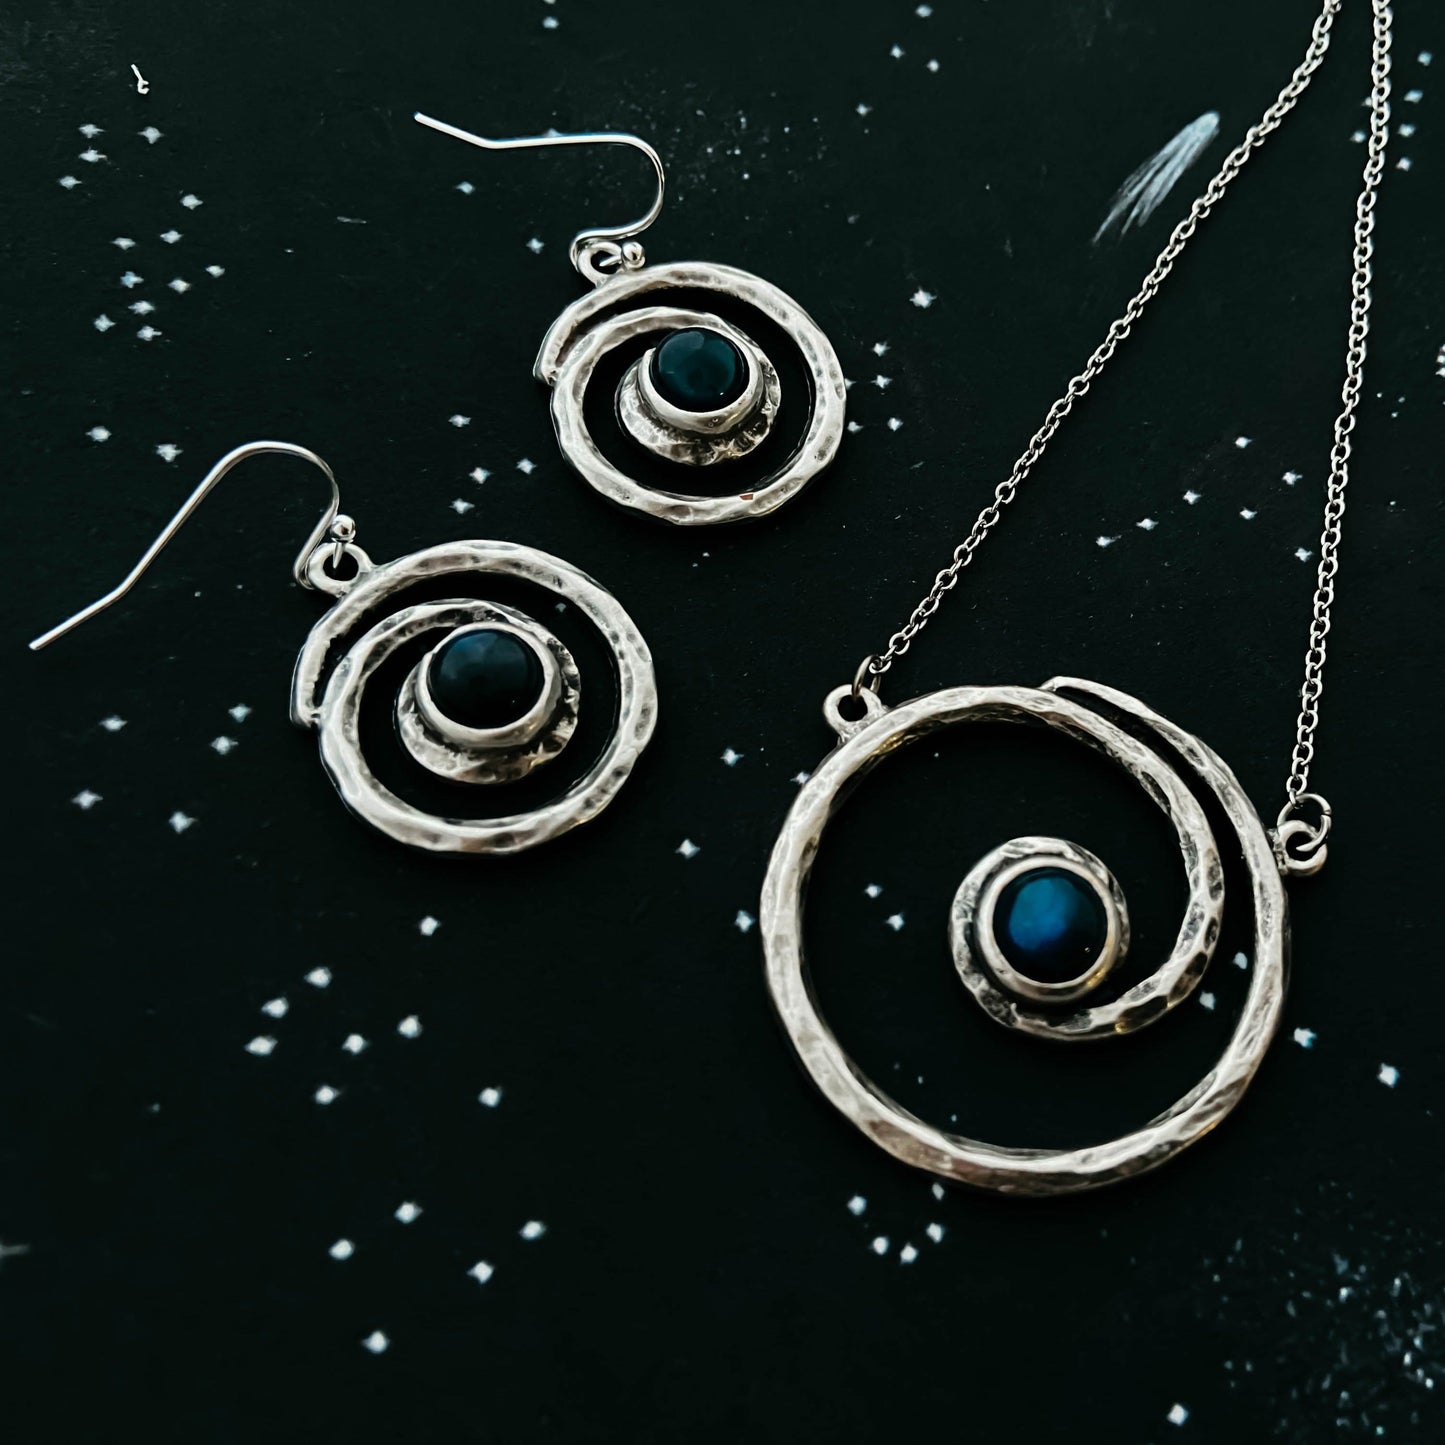 Milky Way Jewelry Set | Spiral Silver Necklace and Earrings with Labradorite